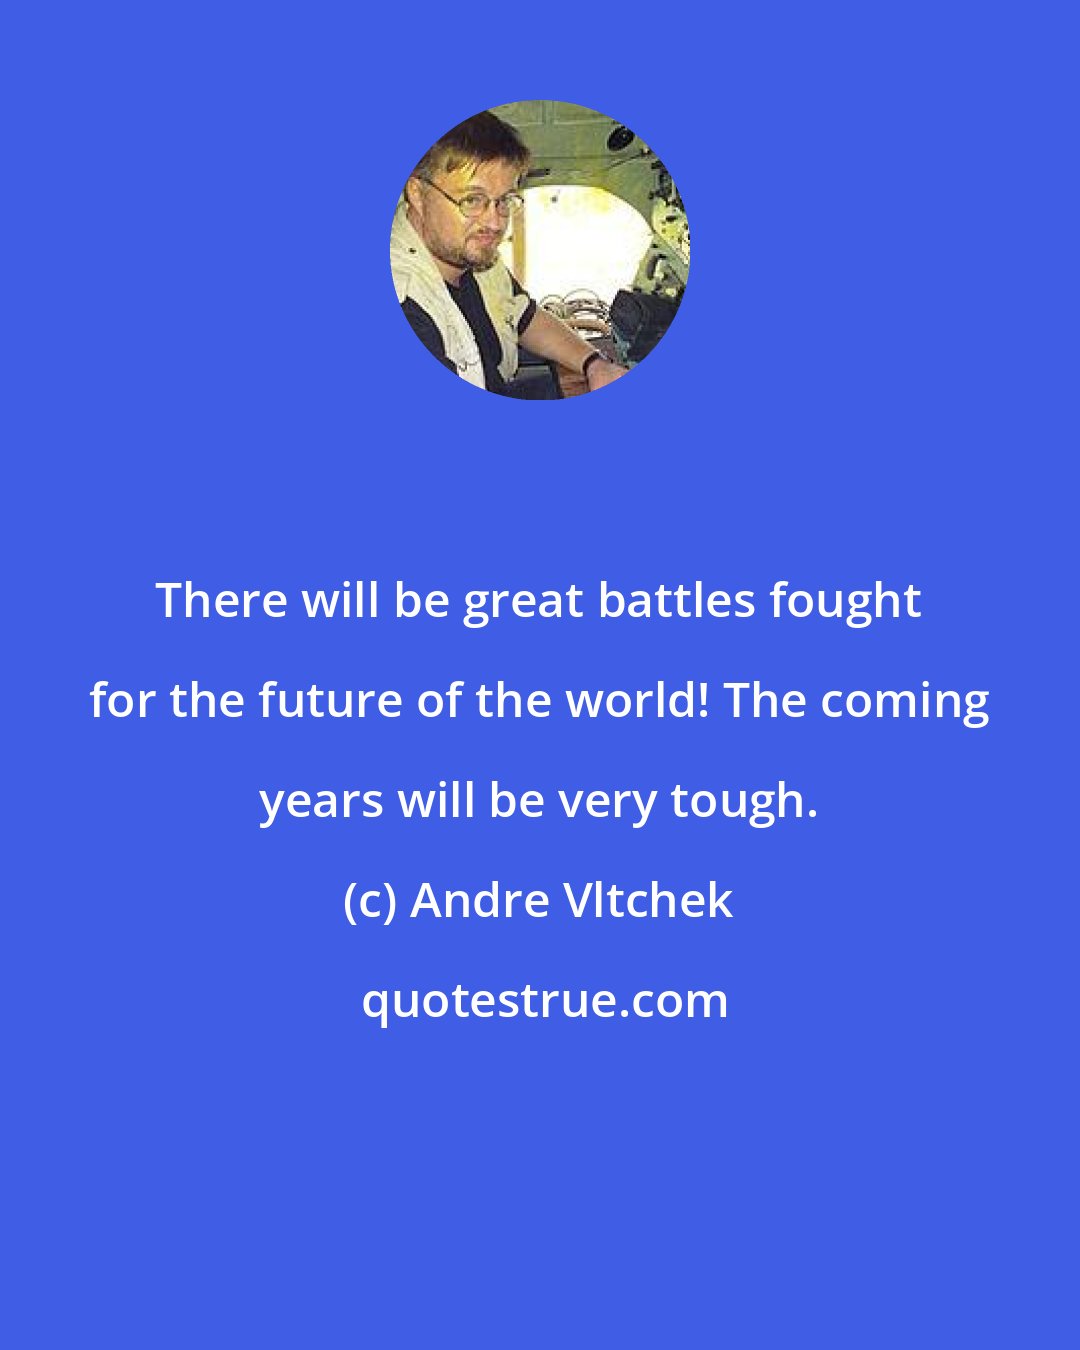 Andre Vltchek: There will be great battles fought for the future of the world! The coming years will be very tough.